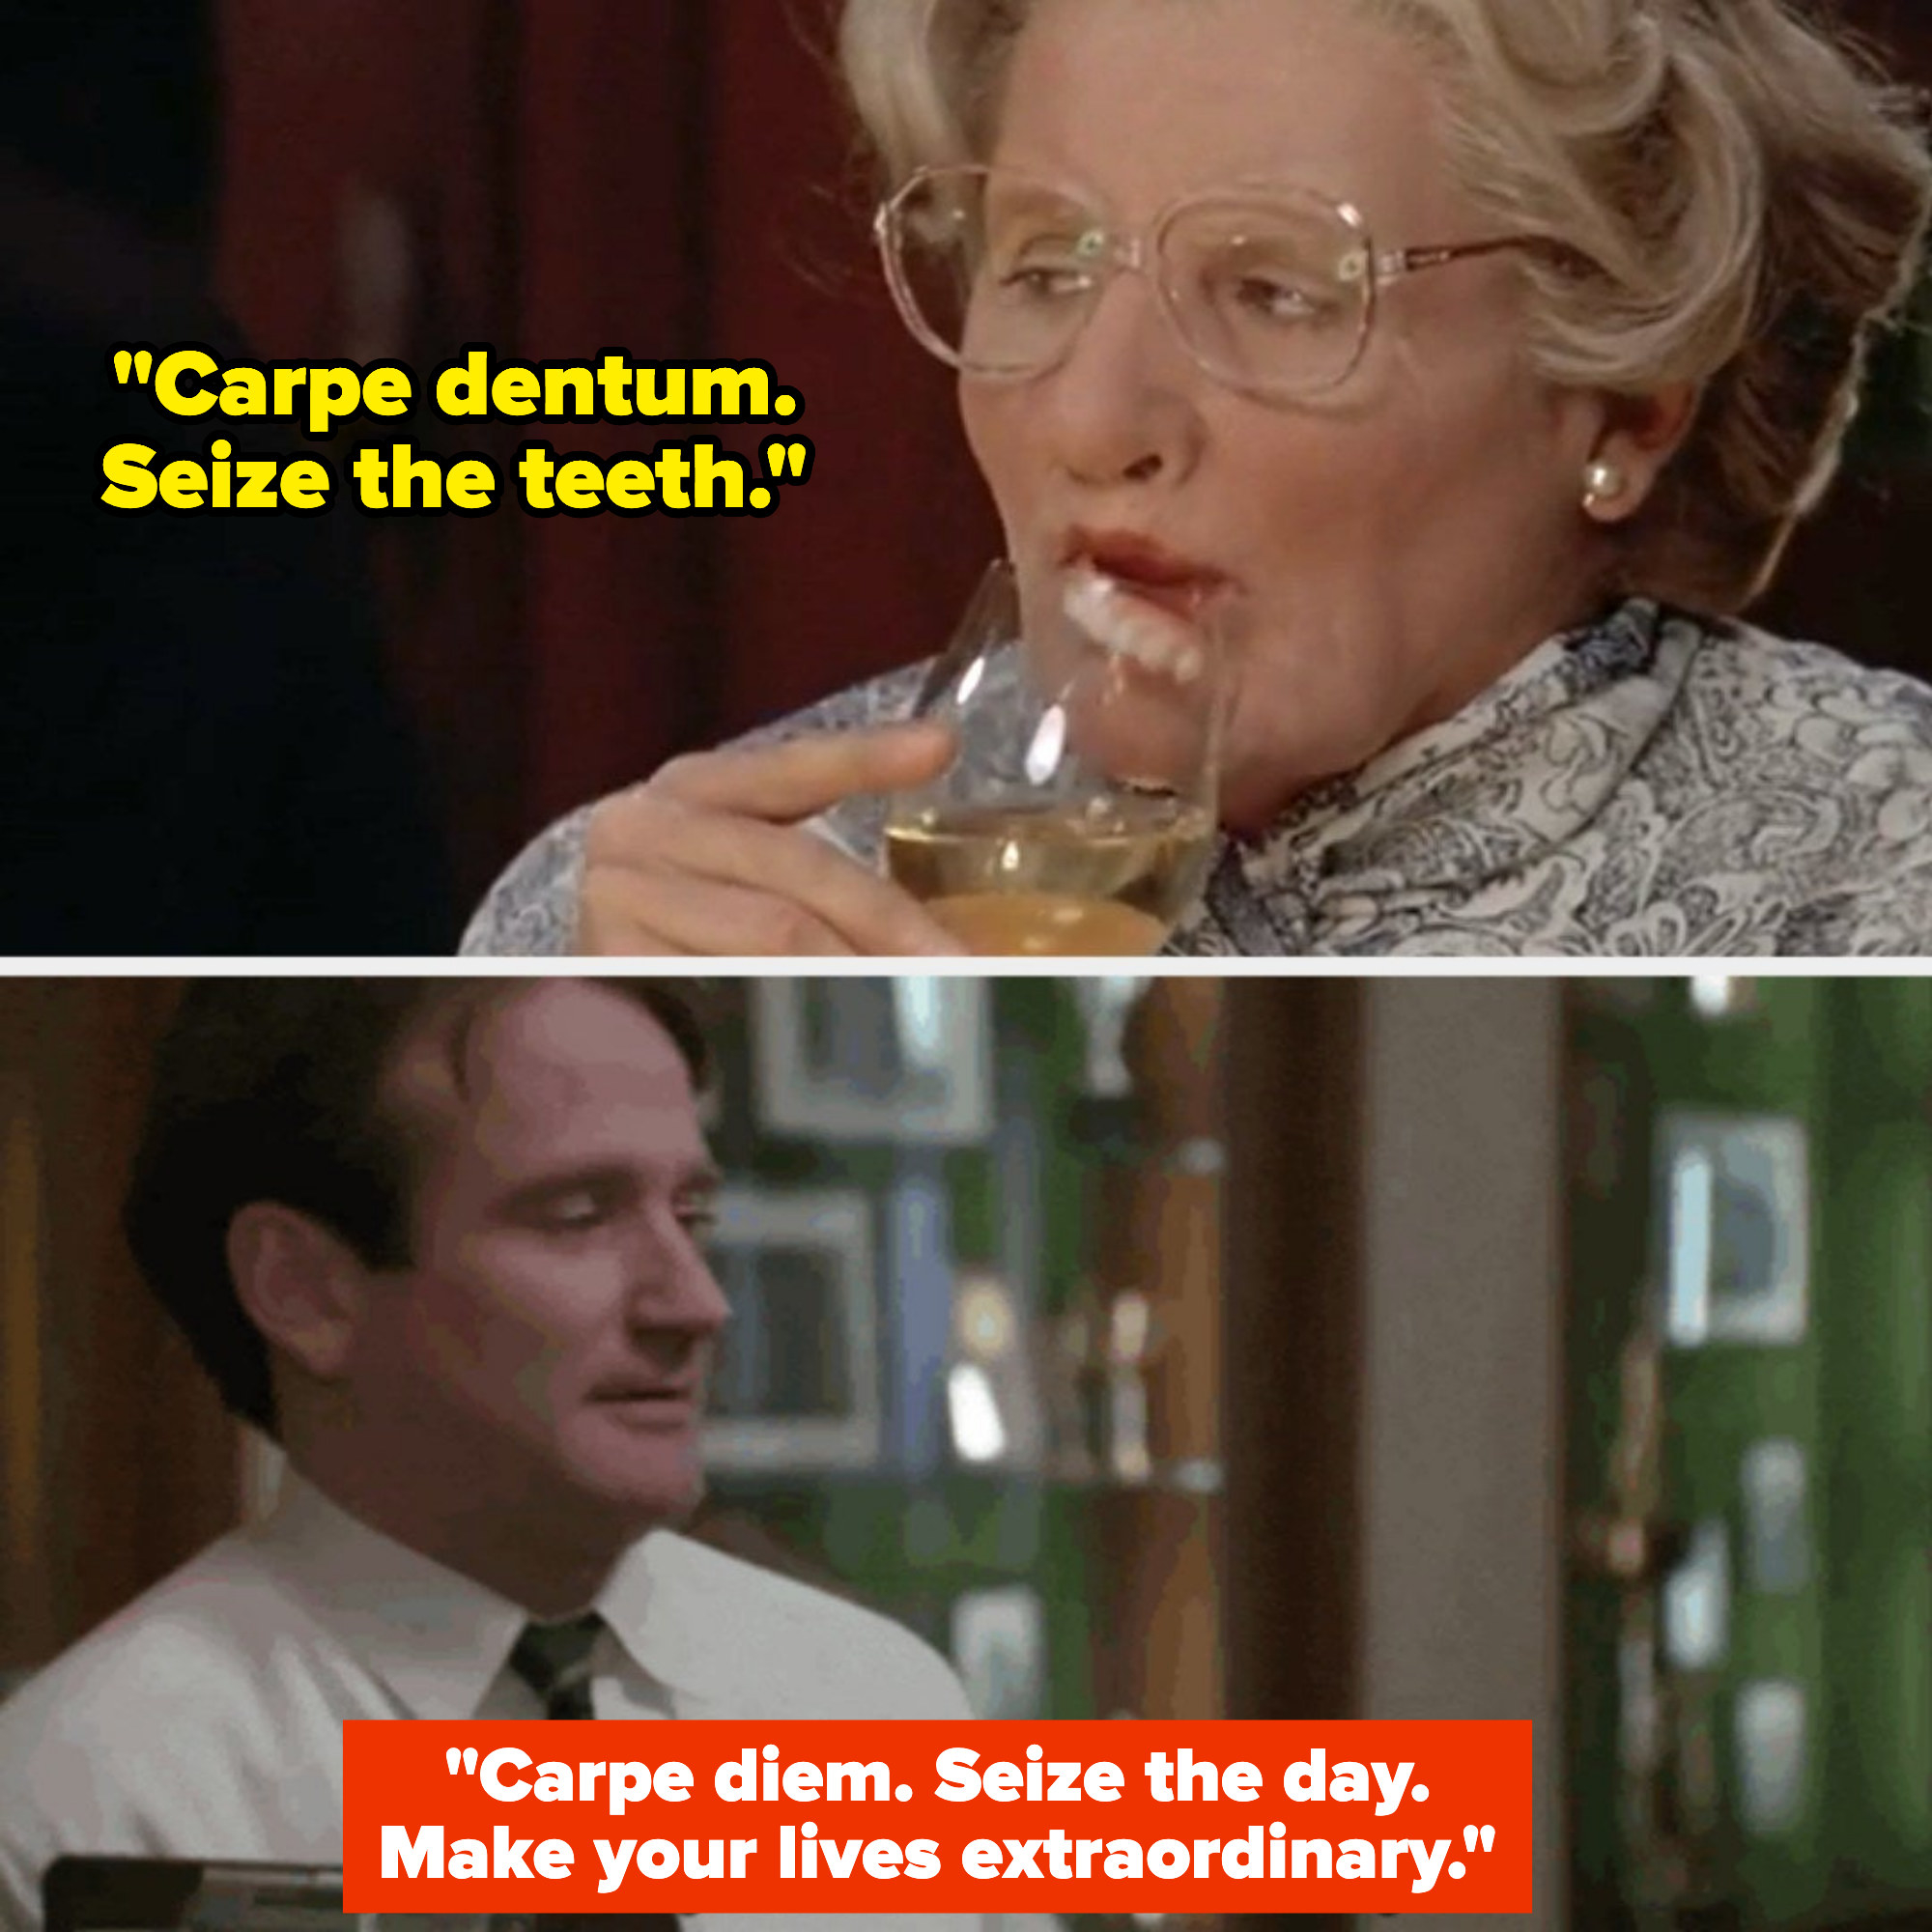 Robin Williams in &quot;Mrs. Doubtfire&quot; and Dead Poets Society